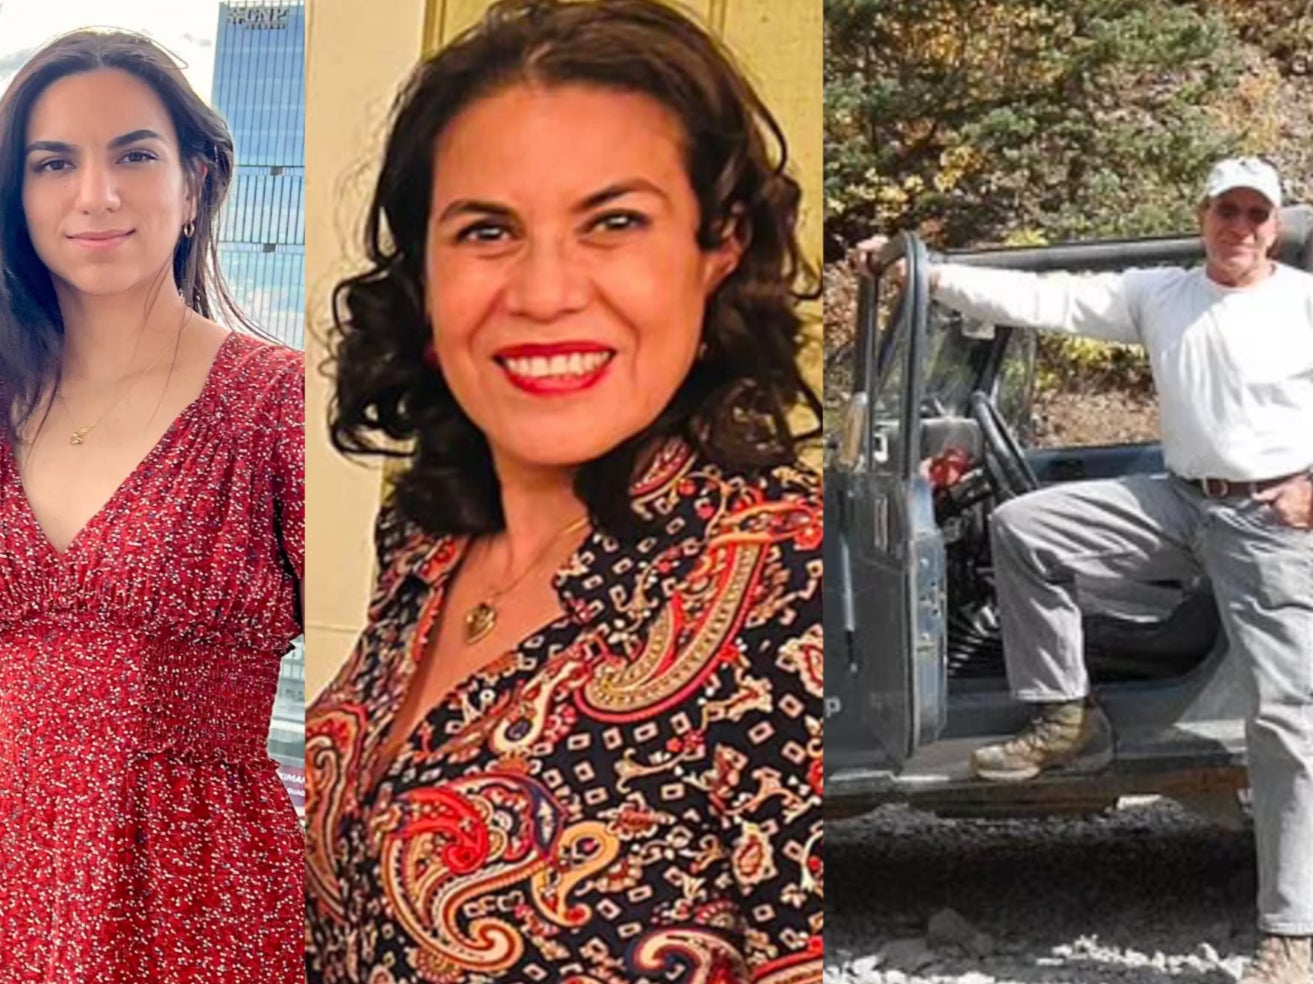 Diana Robles, 28, Ofelia Figueroa-Perez, 60, and Don Fehn, 72. All three died after a Jeep they were in slid off a cliff in the San Juan Mountains in Colorado. The women were related and both worked as nurses. They hired Mr Fehd to drive their Jeep on a sight-seeing tour